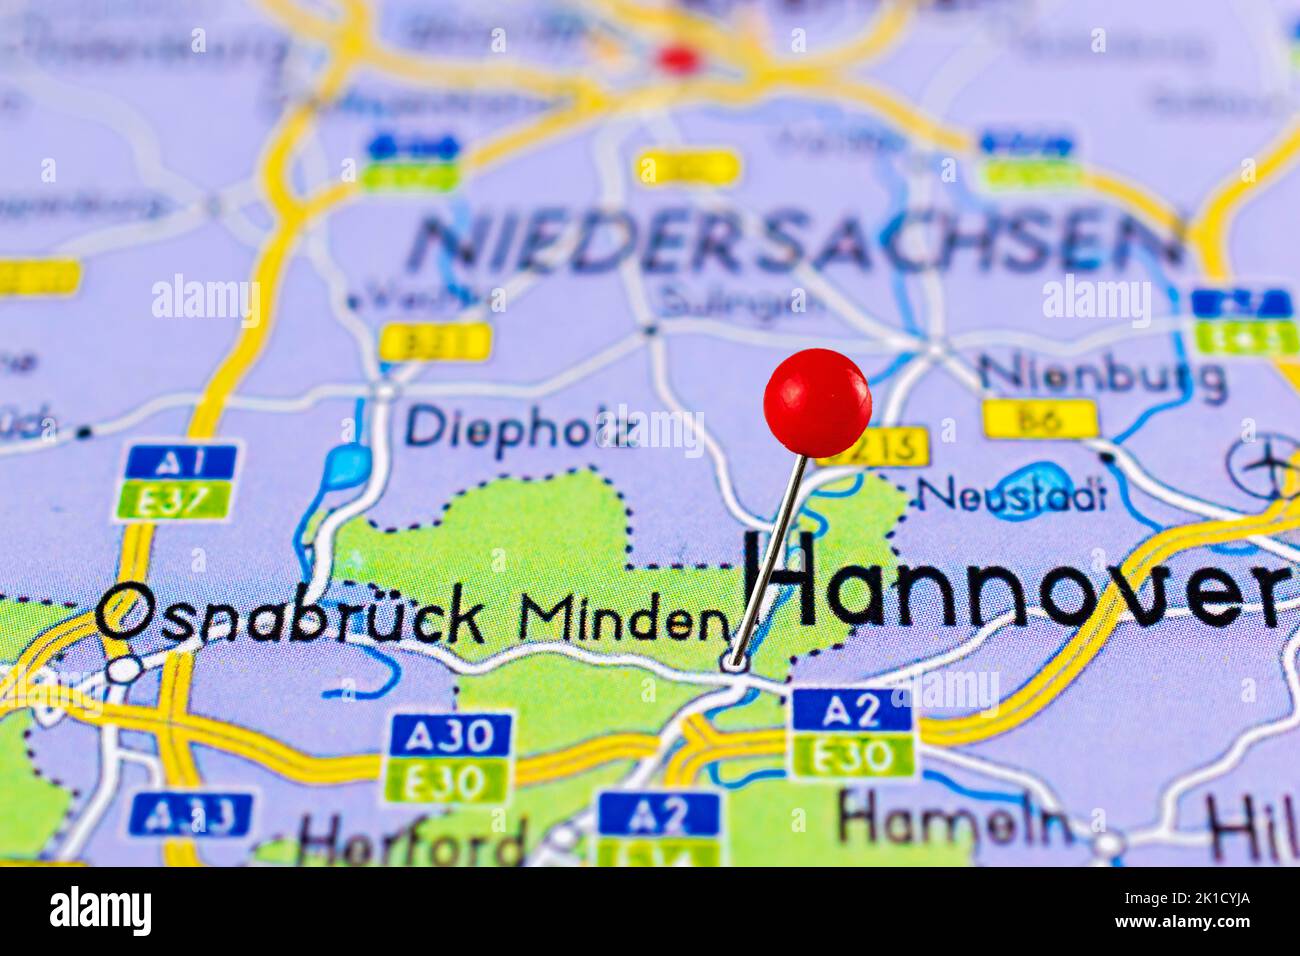 Minden map. Close up of Minden map with red pin. Map with red pin point of Minden in Germany. Stock Photo